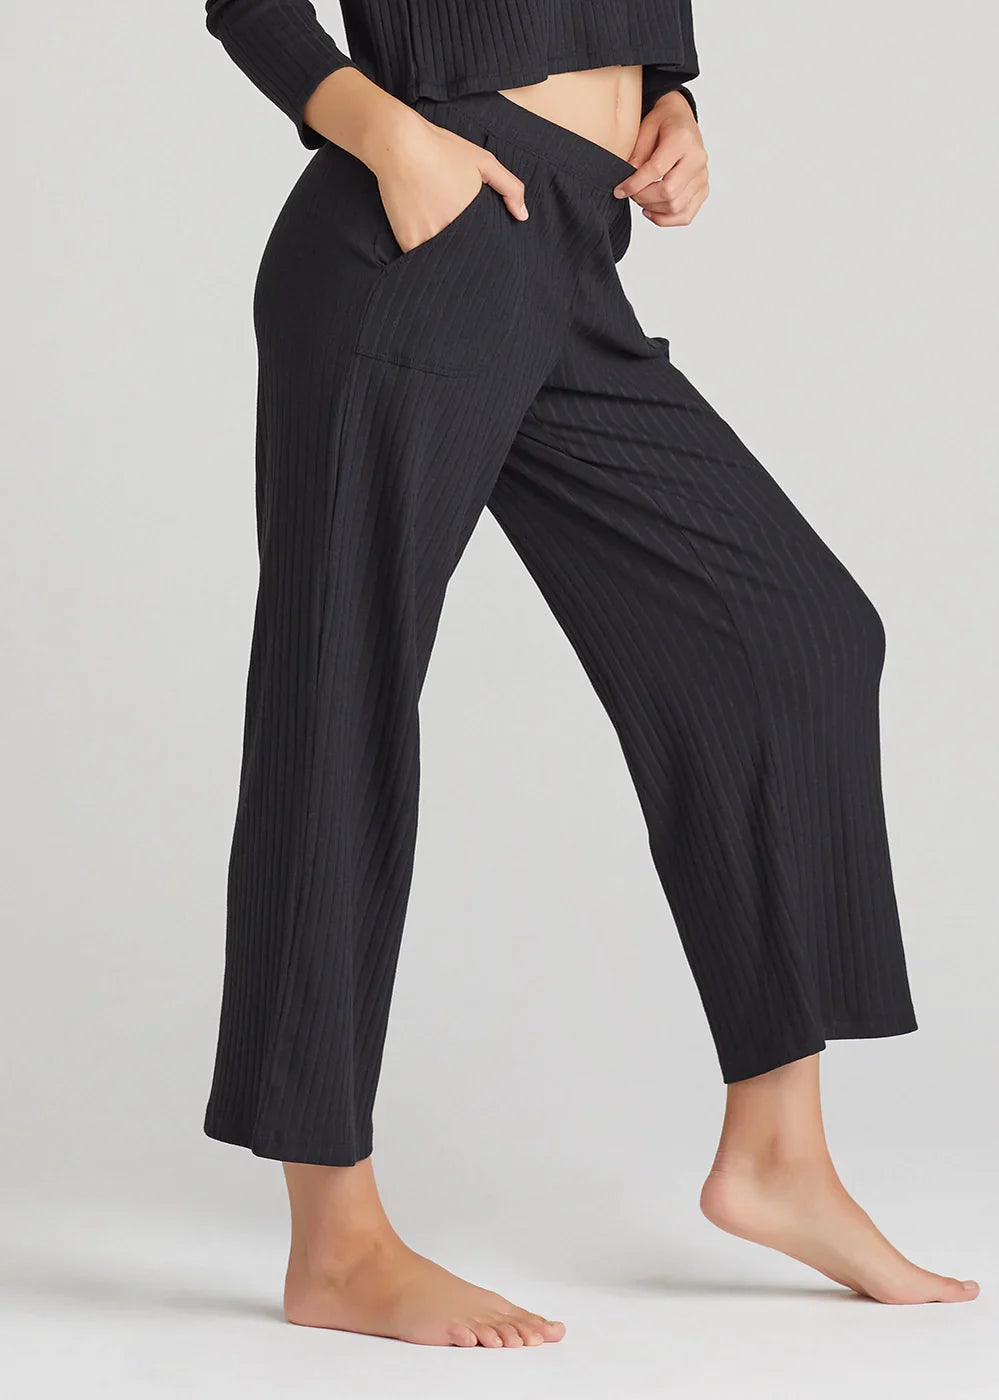 Cropped Lounge Pant - Cotton Rib - FINAL SALE - Premium Lounge Wear Denim from Yummie - Just $10! Shop now at shopthedenimbar